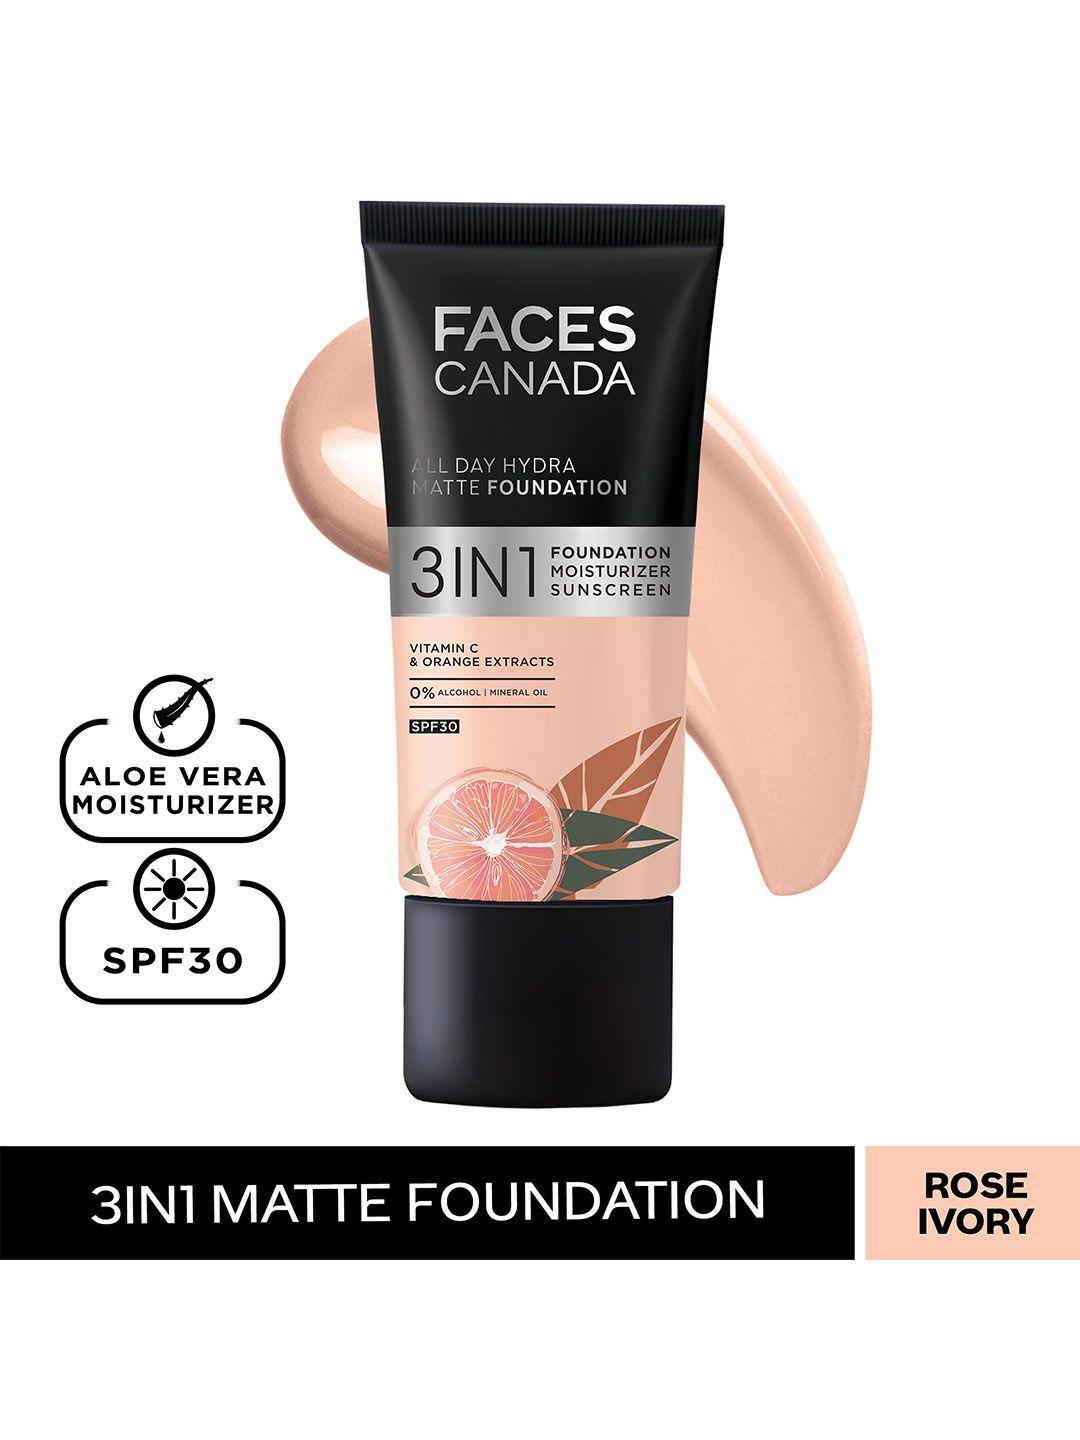 faces canada 3-in-1 all day hydra matte spf30 foundation 25ml - rose ivory 011